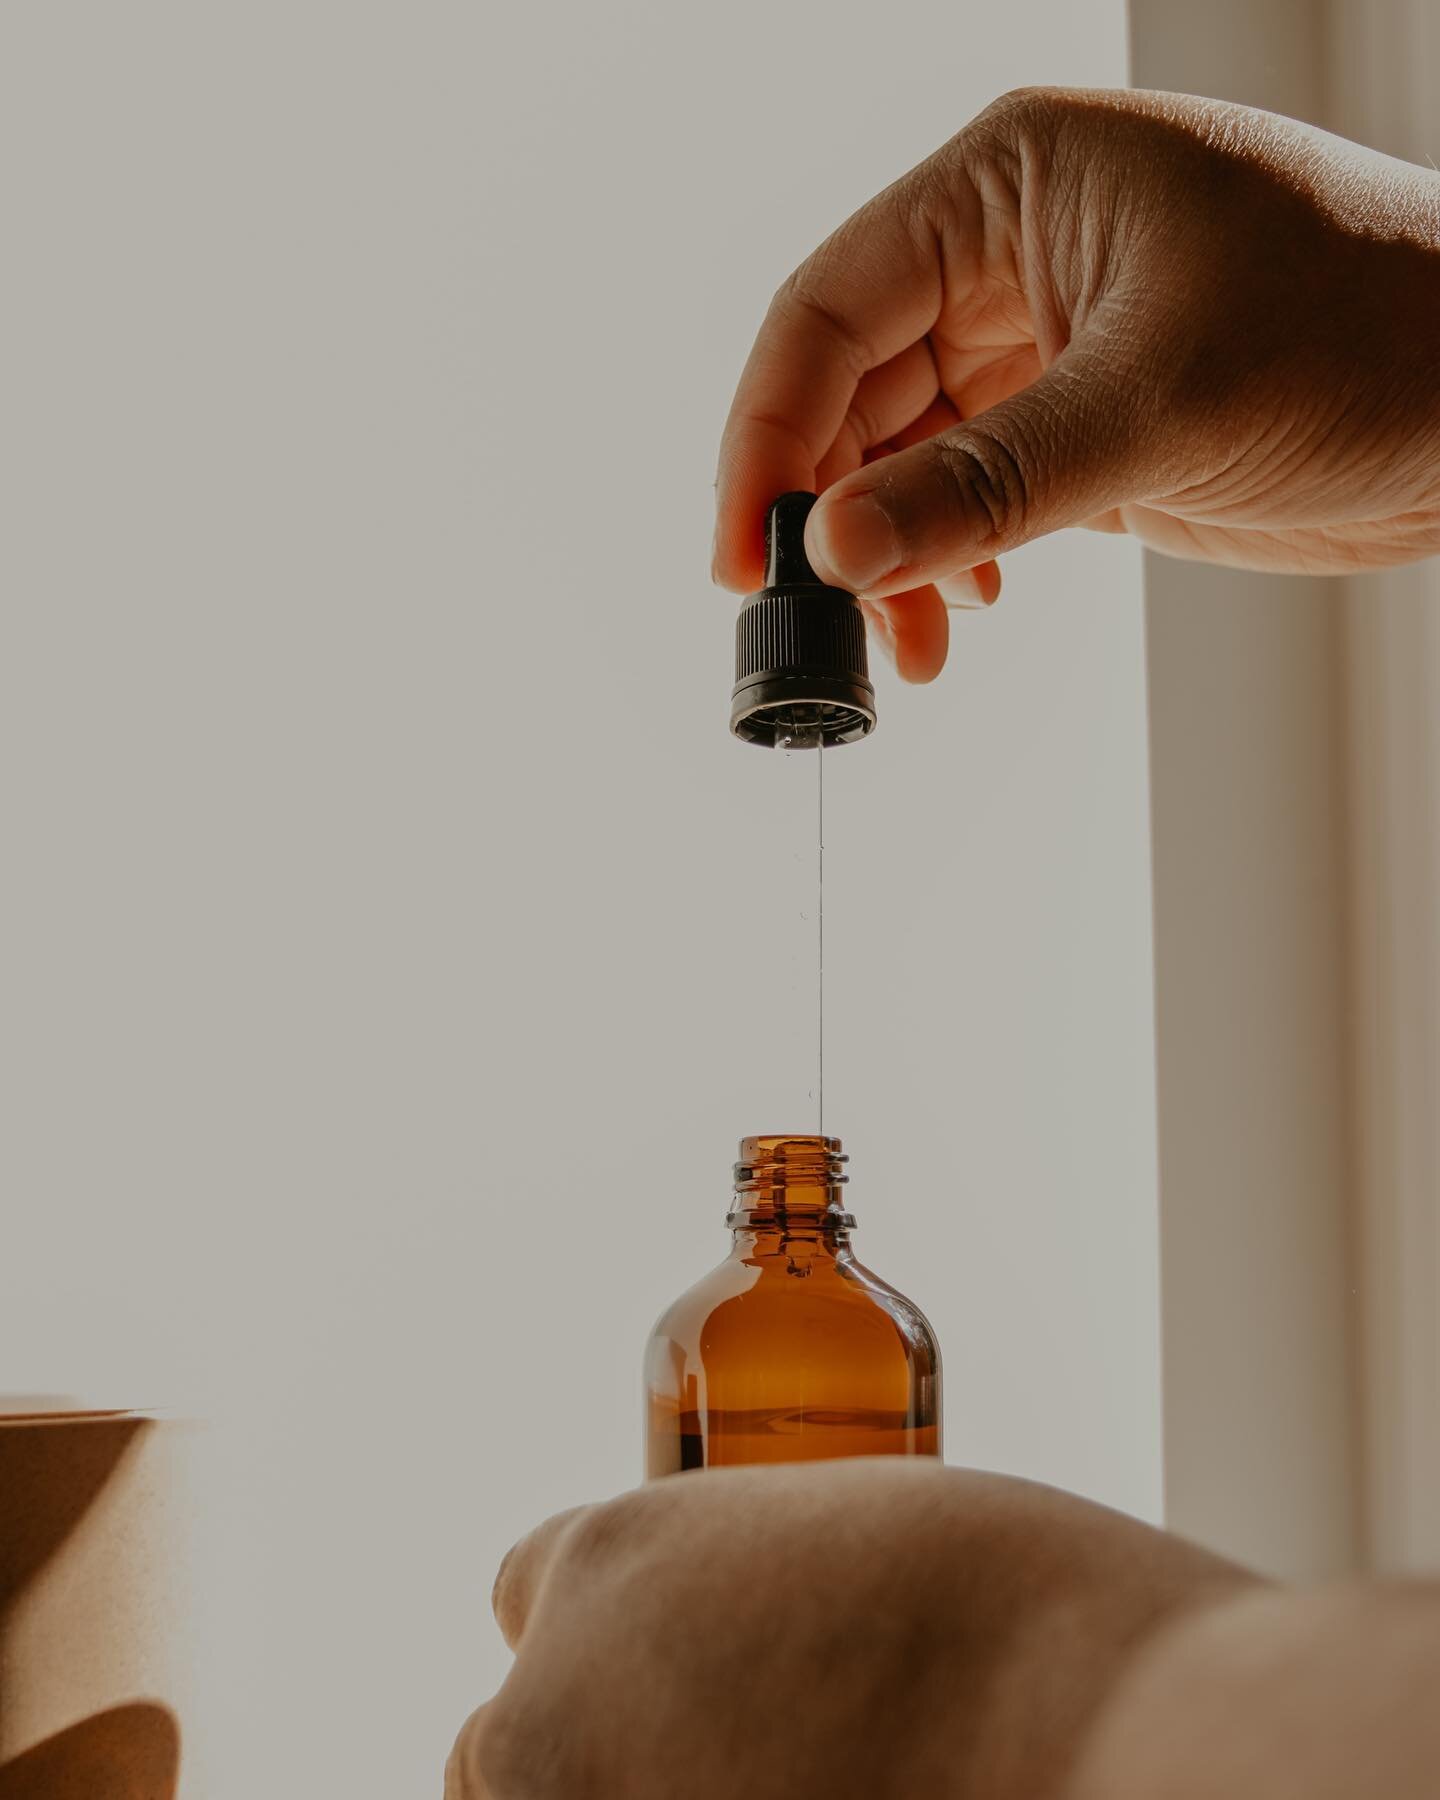 Why do we love tinctures? Because they make incorporating herbs into our daily lives EASY. ⁣
⁣
Tinctures are concentrated herbal extracts primarily extracted with water and alcohol, or occasionally glycerin. Alcohol is a great extractor of medicinal 